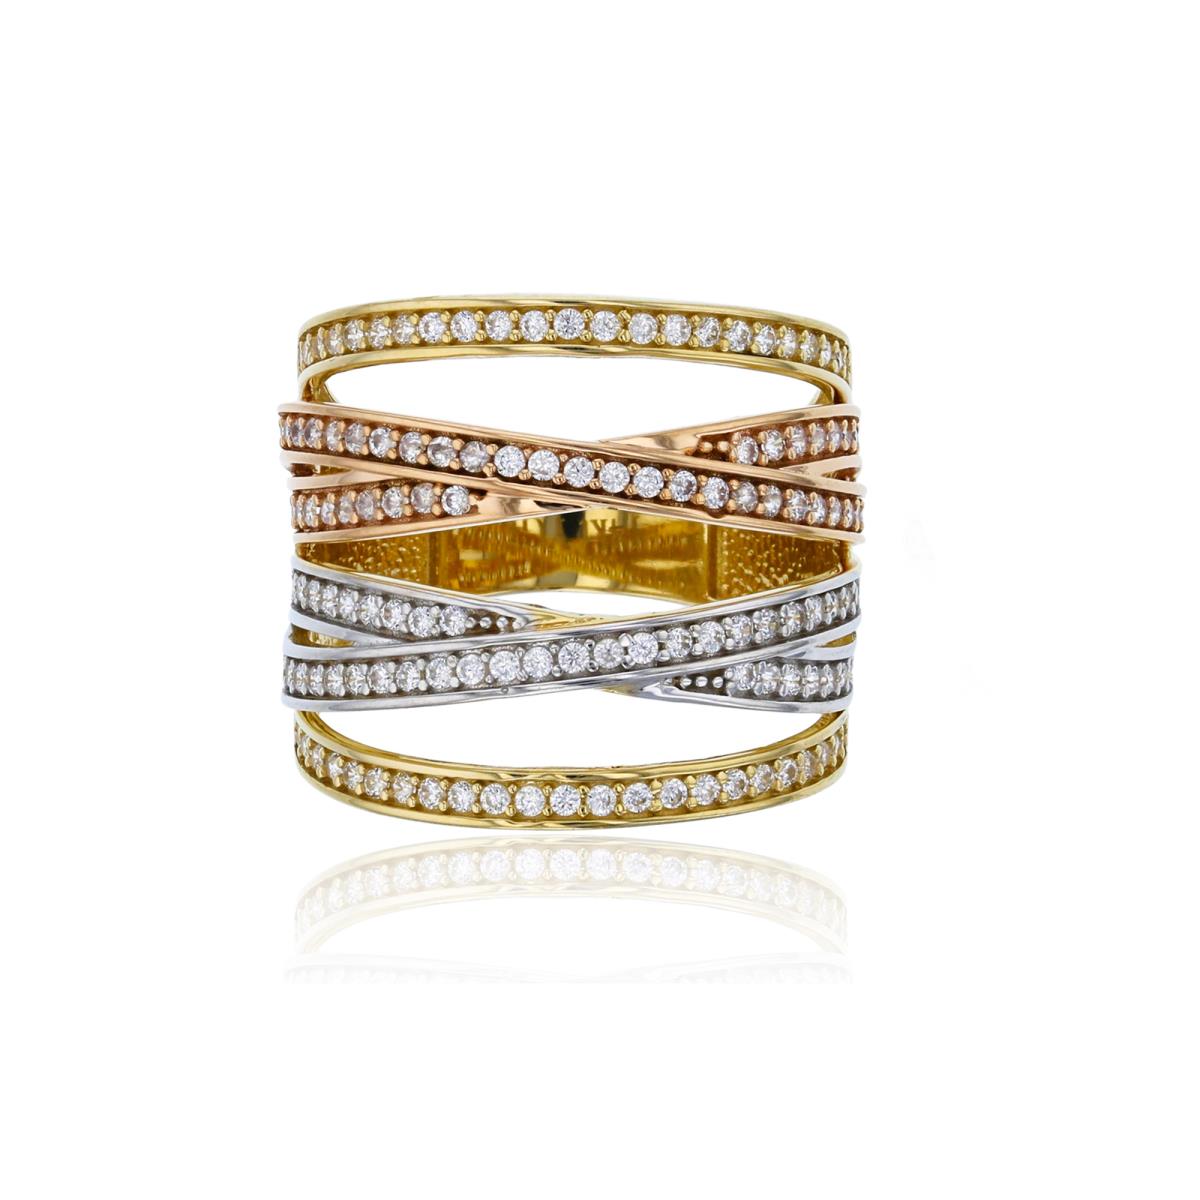 10K Tricolor Gold Micropave Multi-Row Criss Cross Fashion Ring